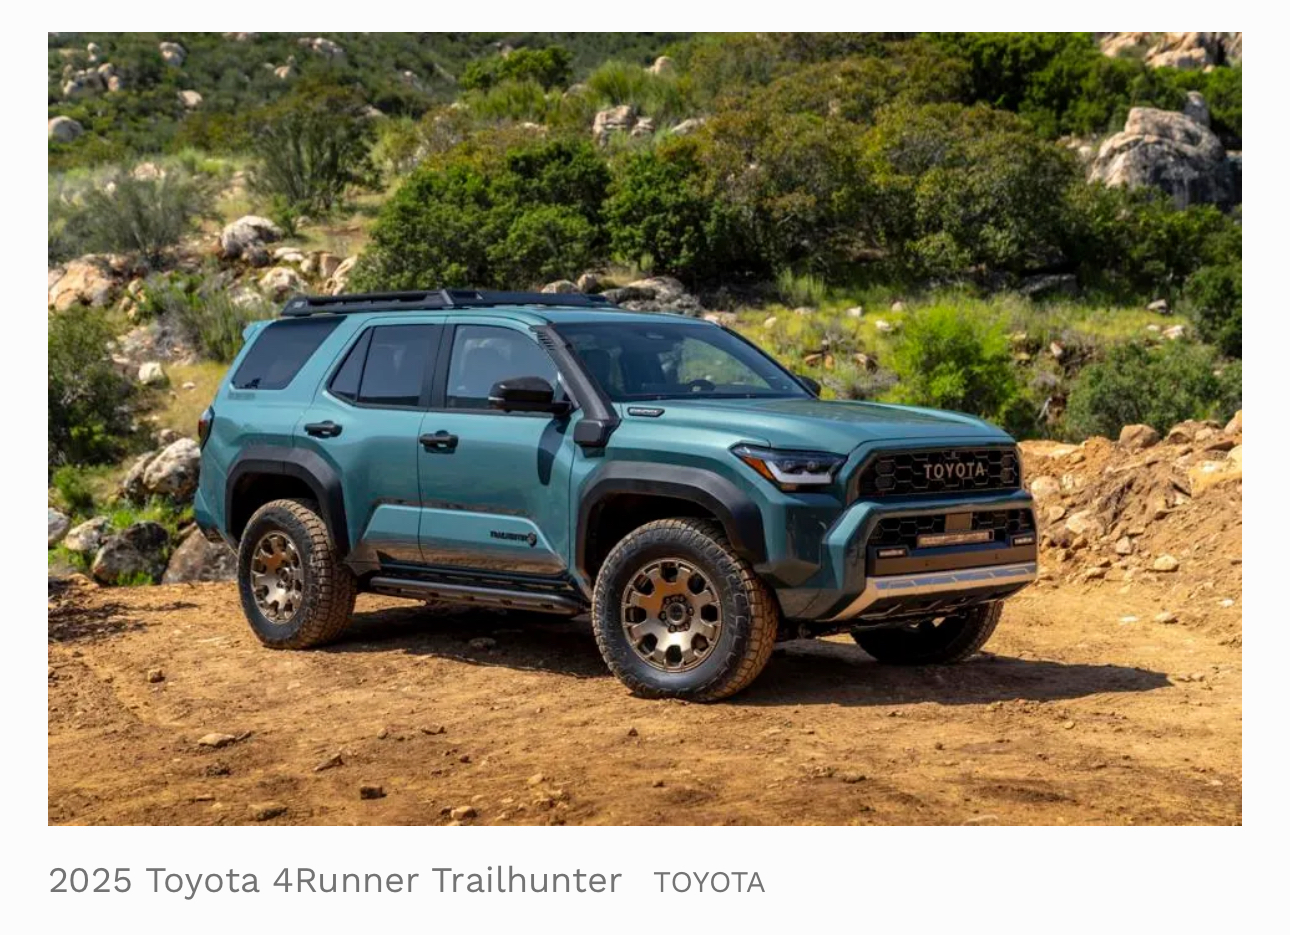 2025 Toyota 4runner 2025 4Runner Photos & Specs! 🔥 Trailhunter, TRD Pro, Off-Road, Limited Trims IMG_3835